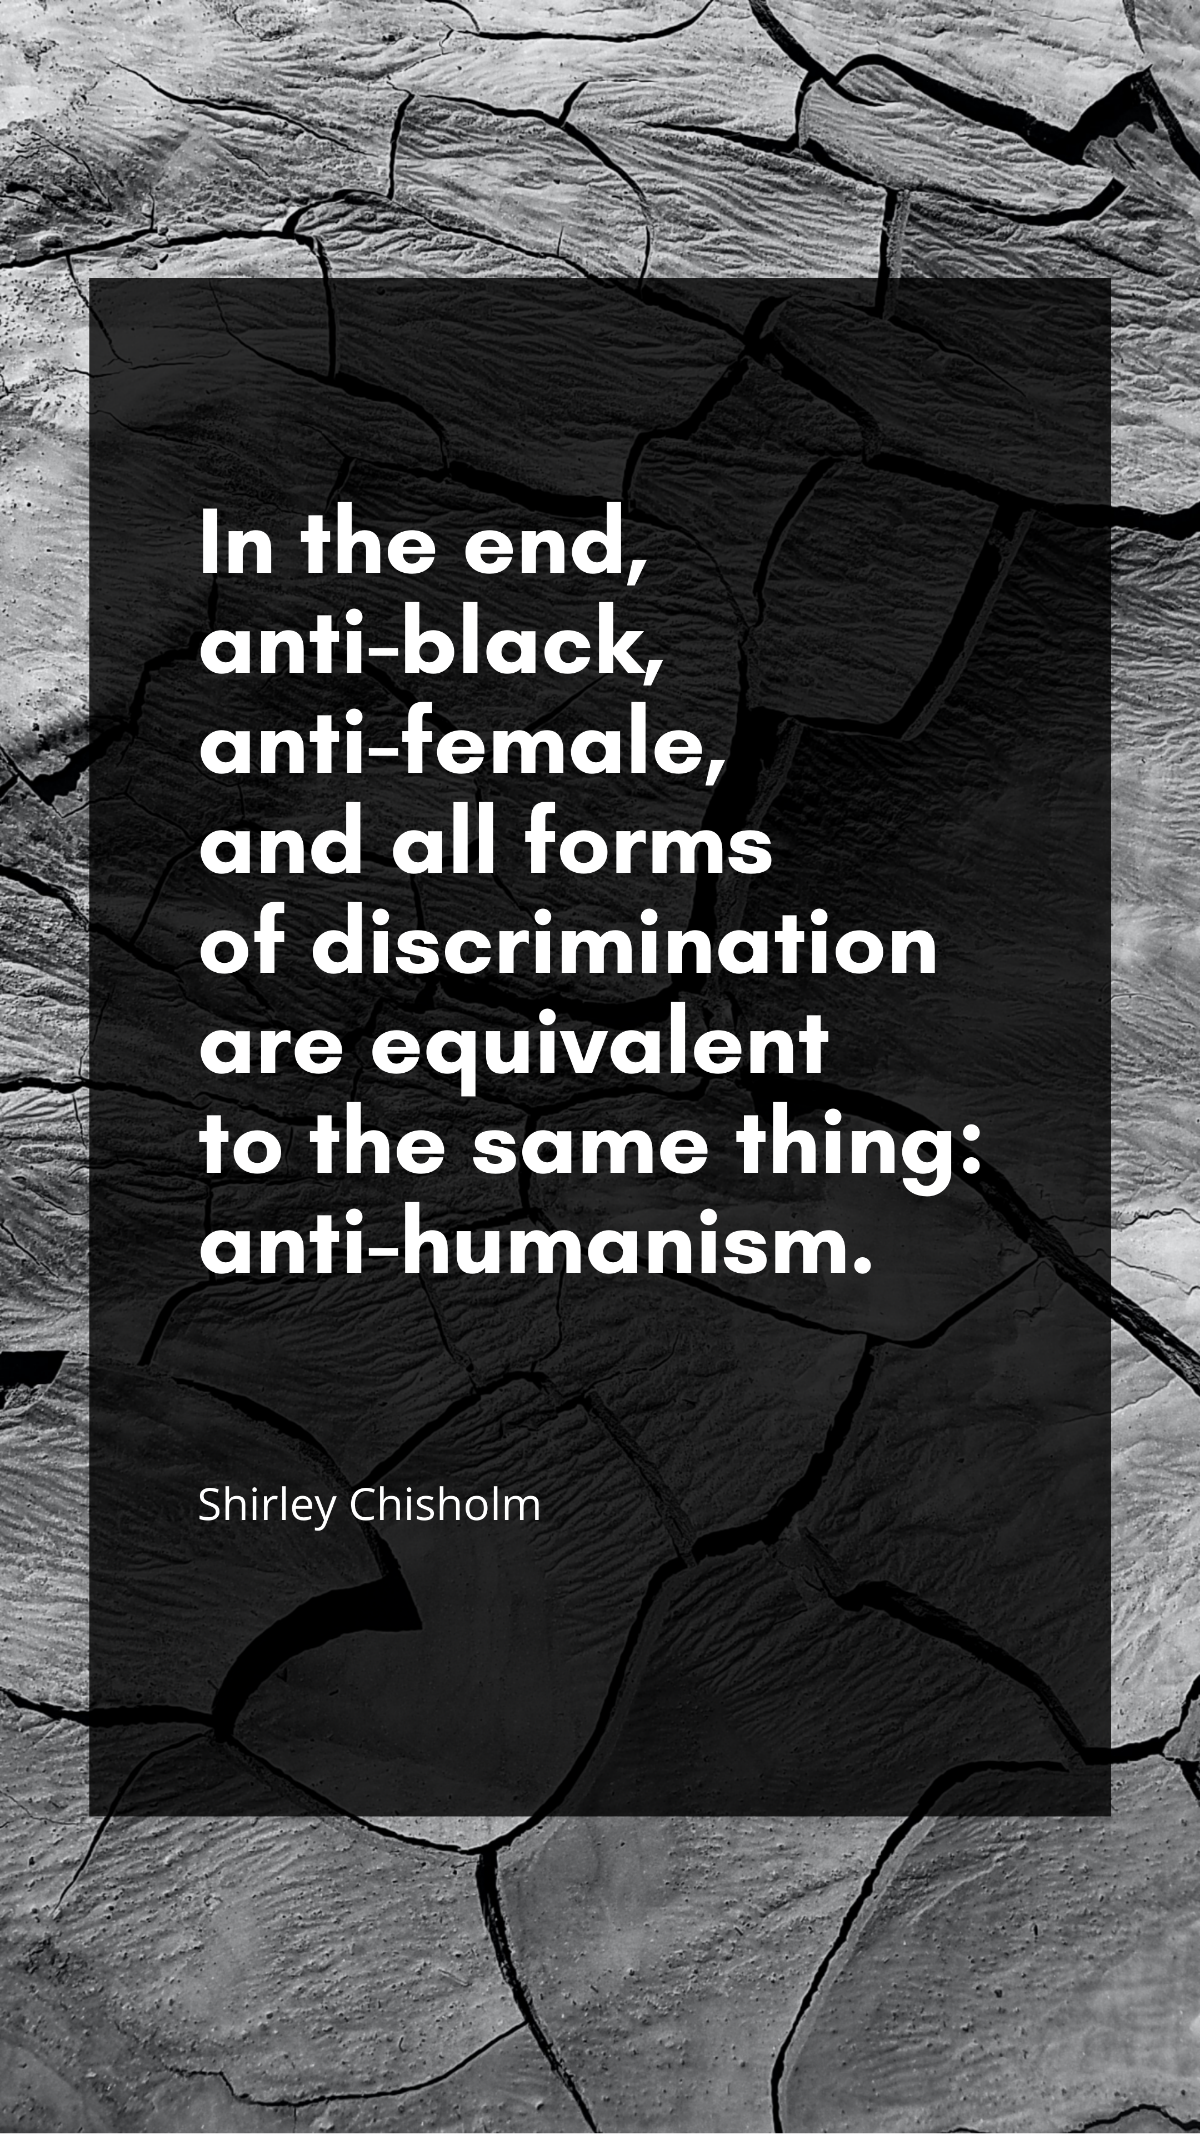 Shirley Chisholm - In the end, anti-black, anti-female, and all forms of discrimination are equivalent to the same thing: anti-humanism.